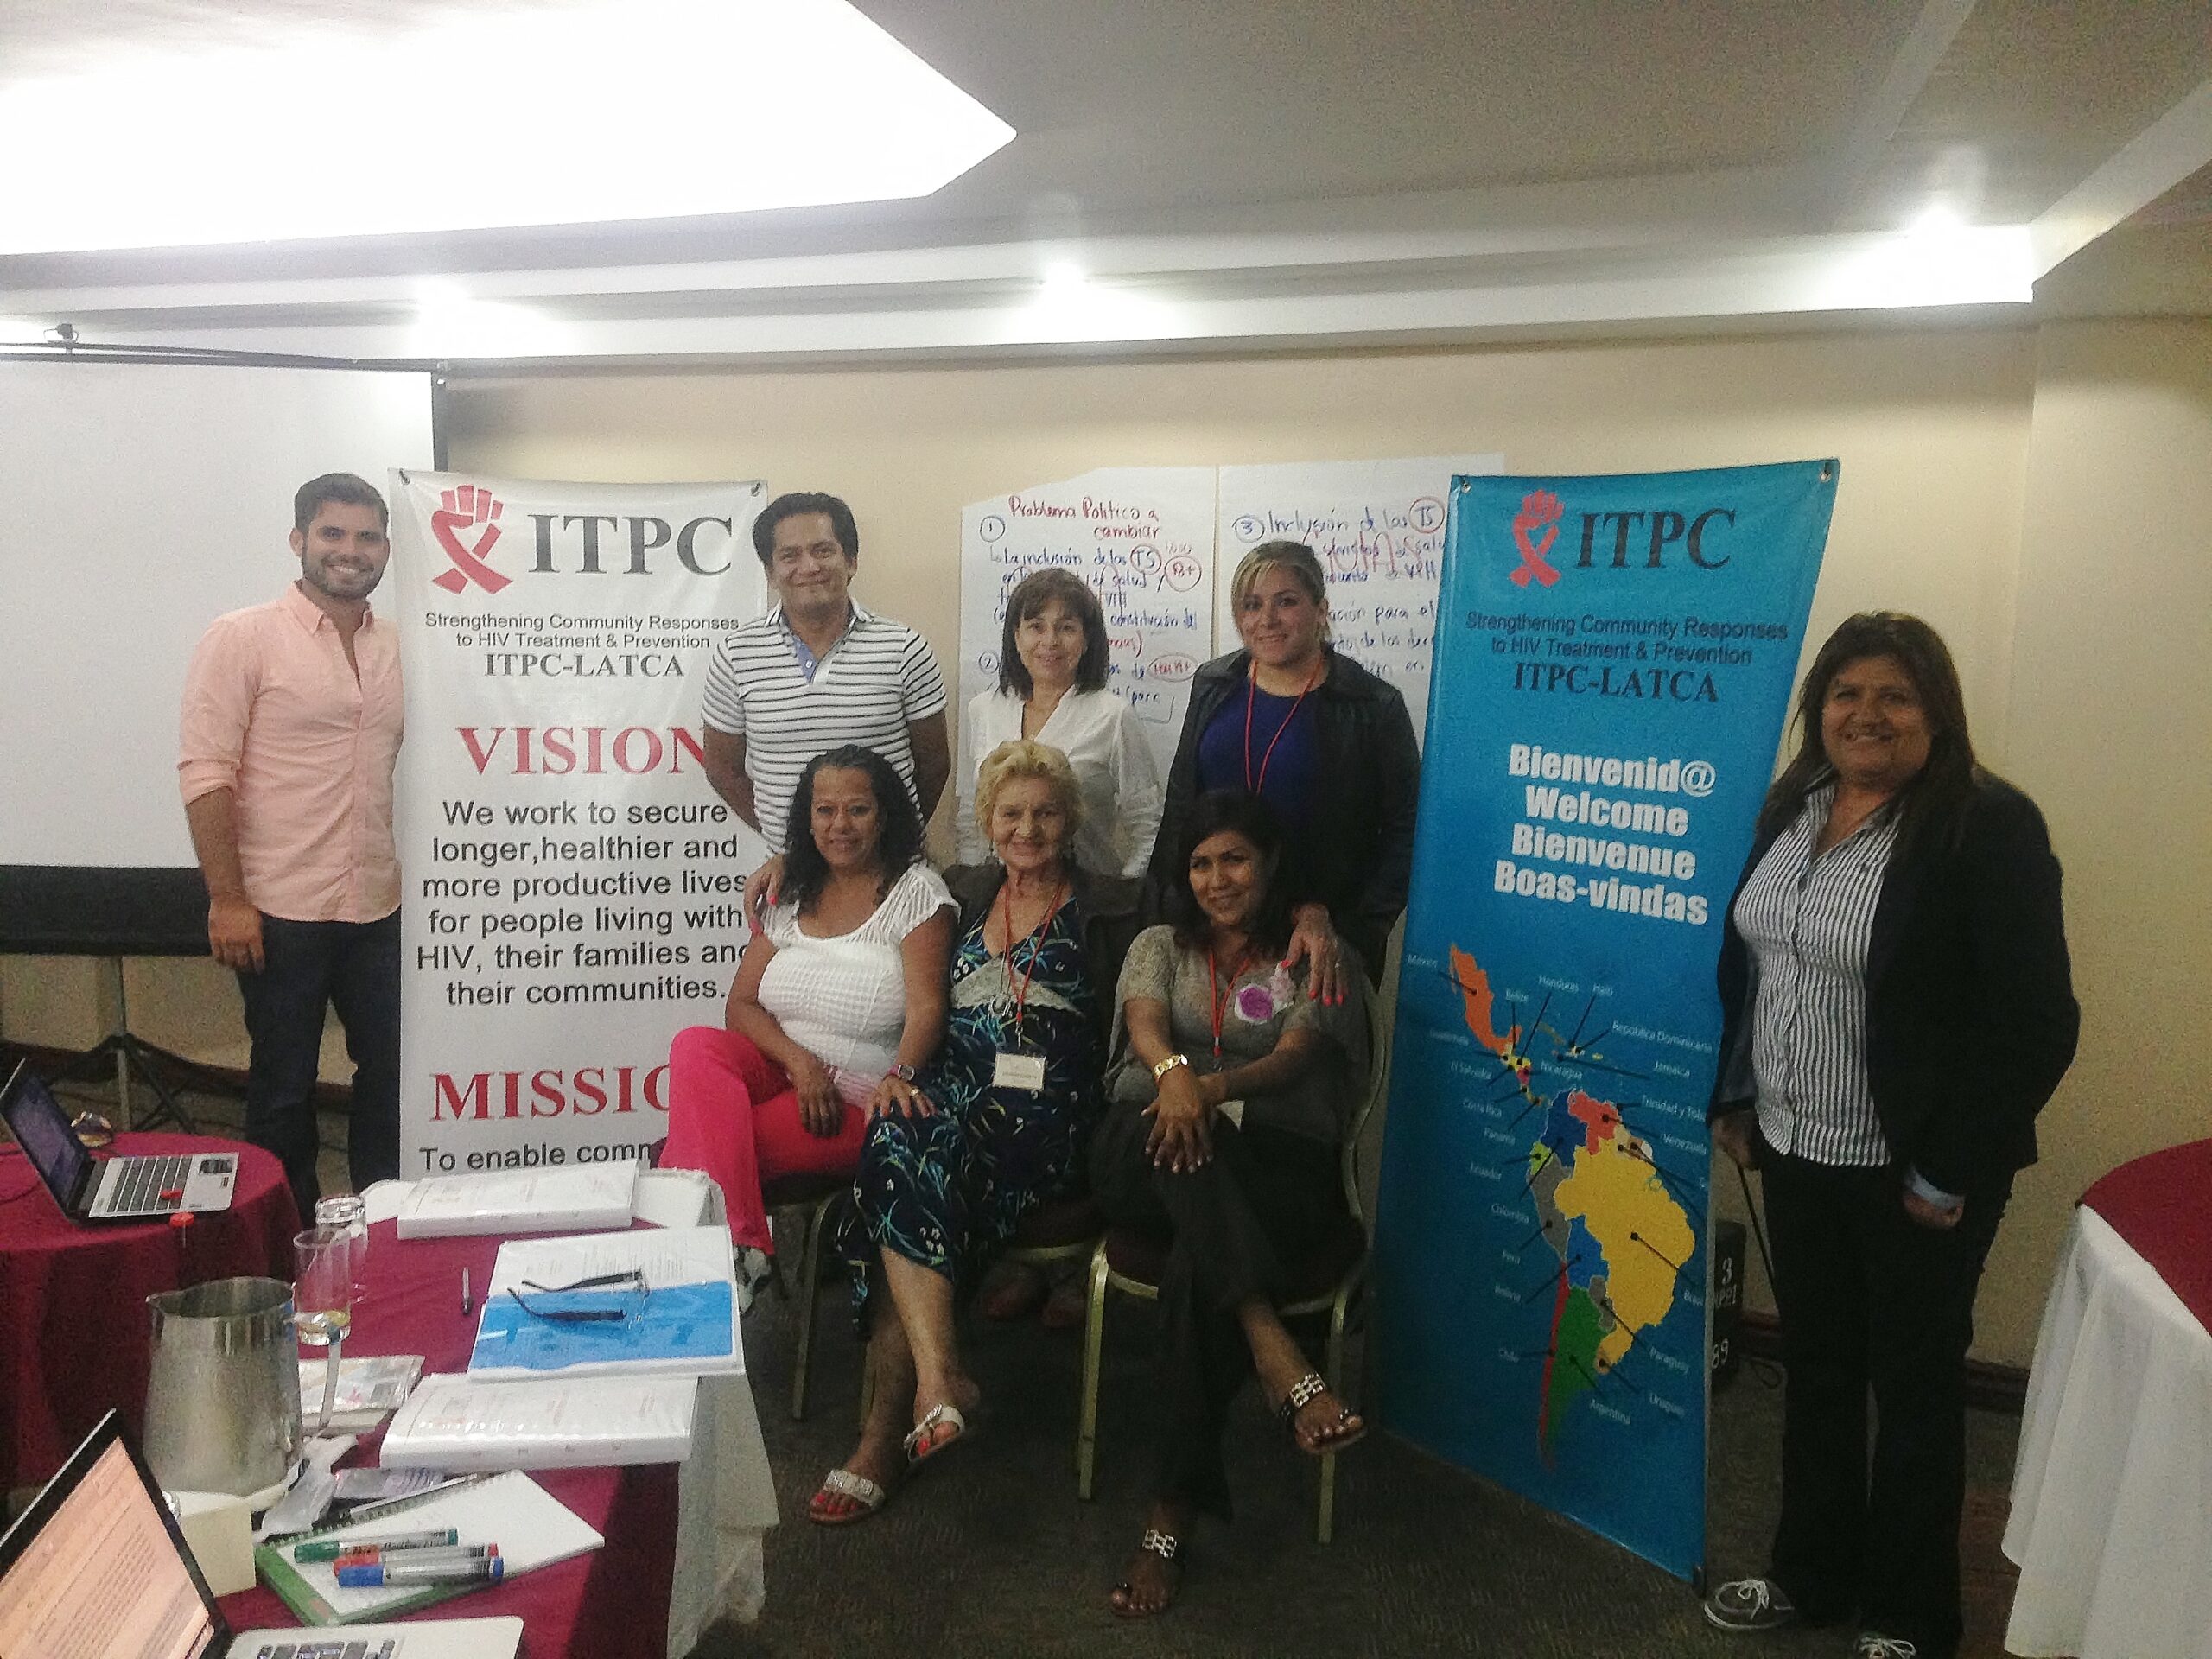 ITPC Announces the Formation of ITPC Latin America and the Caribbean (ITPC LATCA)